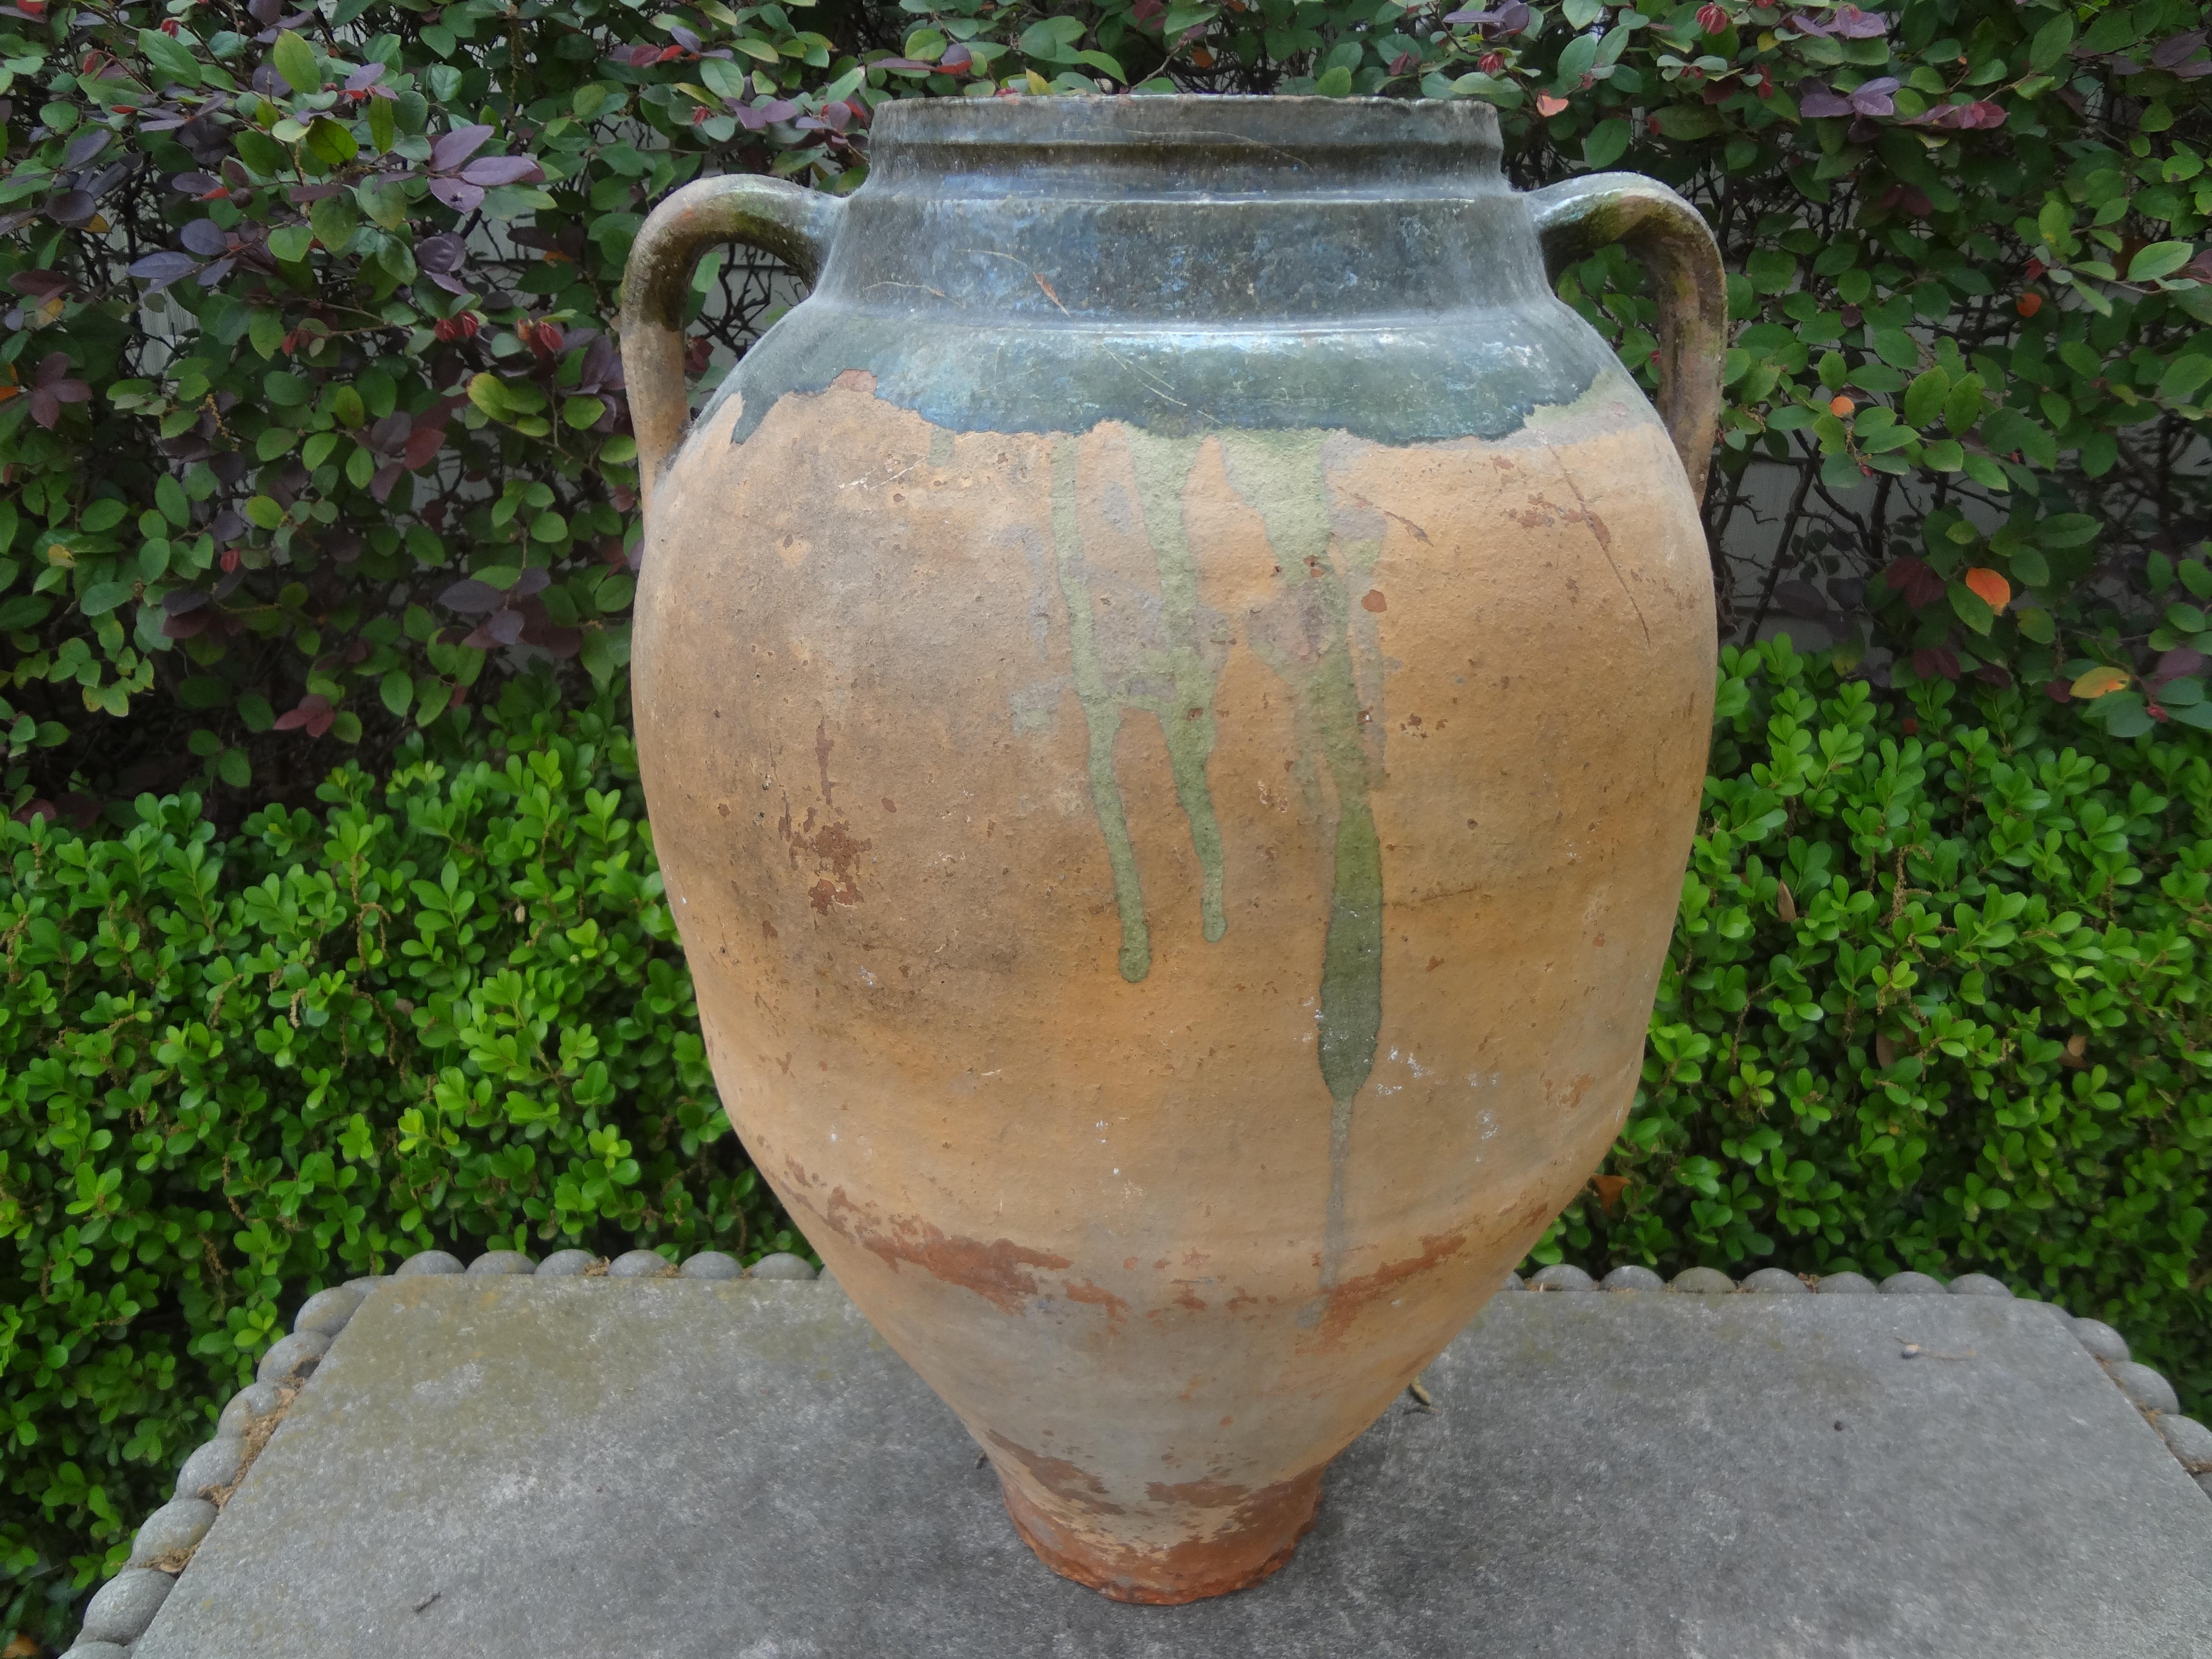 Large 19th century French earthenware vessel.
This handsome antique French Provincial earthenware, pottery or terra cotta urn or vessel with handles was originally used for storing olives or olive oil and is now a beautiful decorative